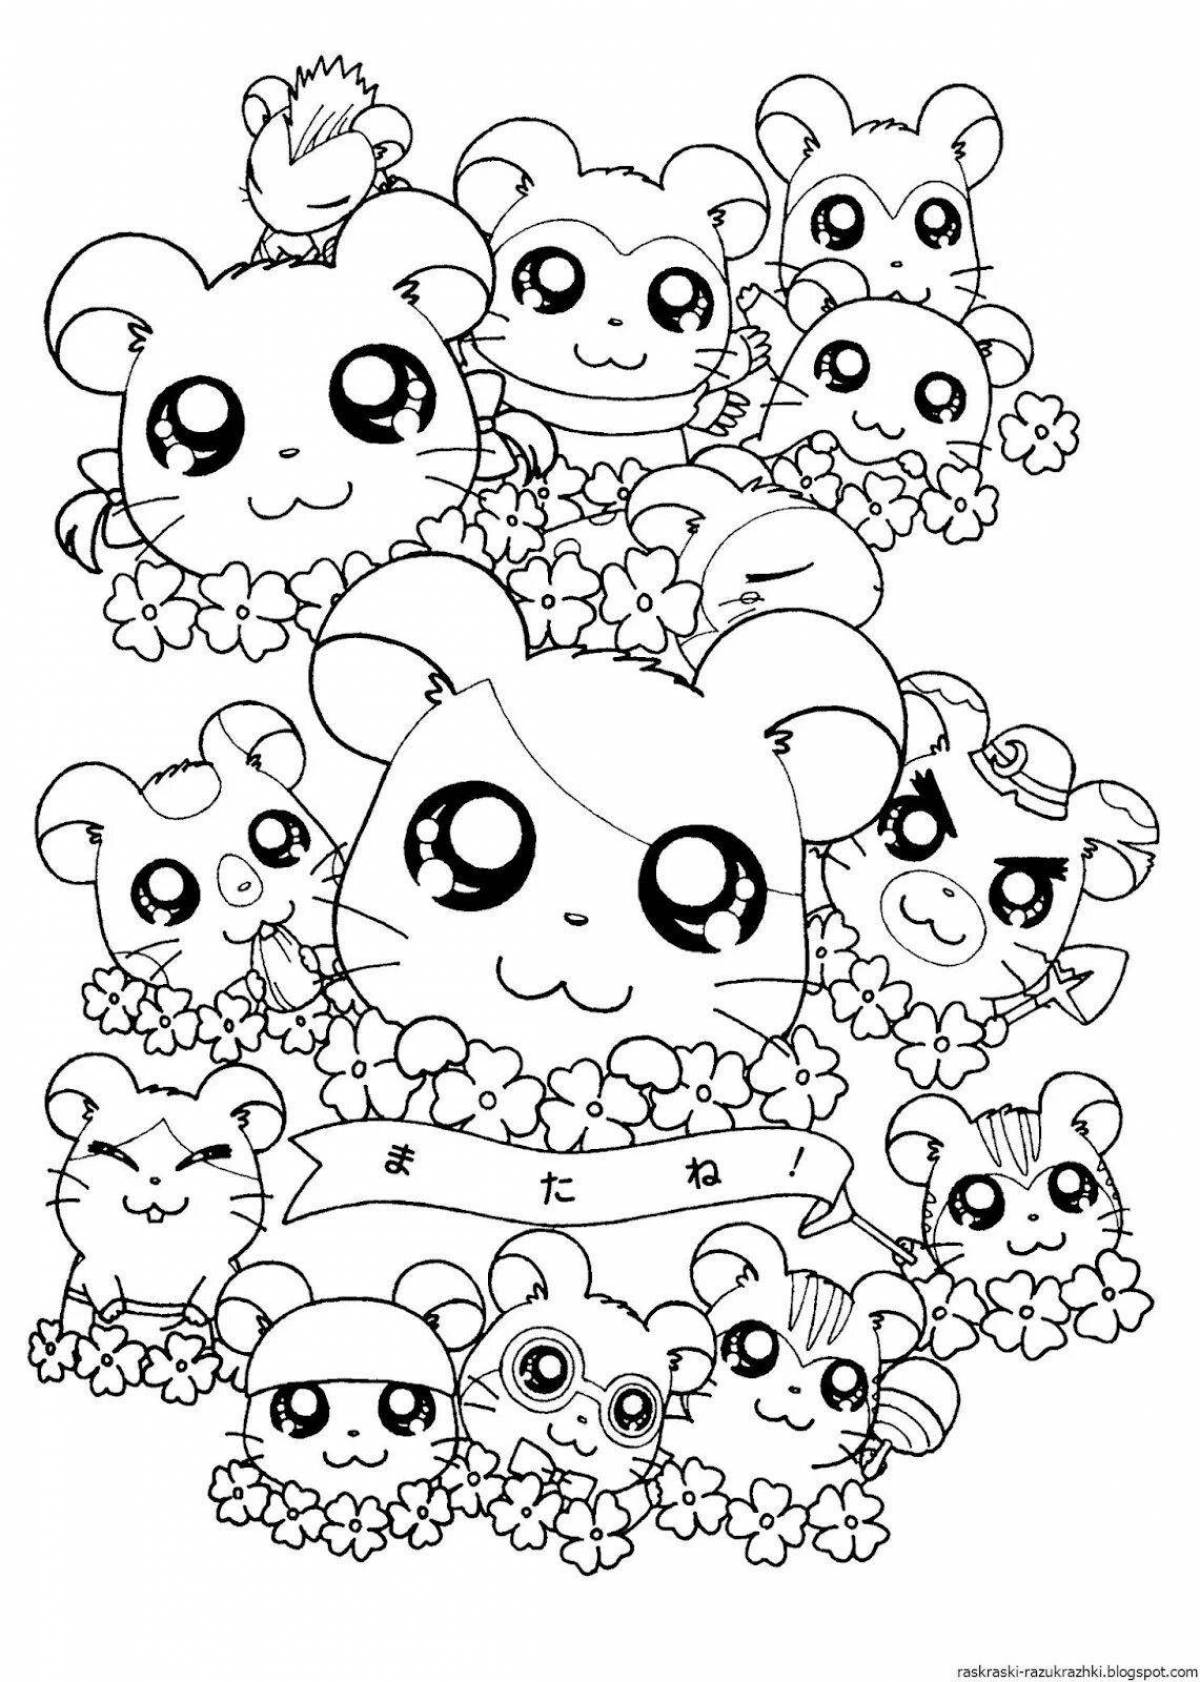 Fine animal coloring pages